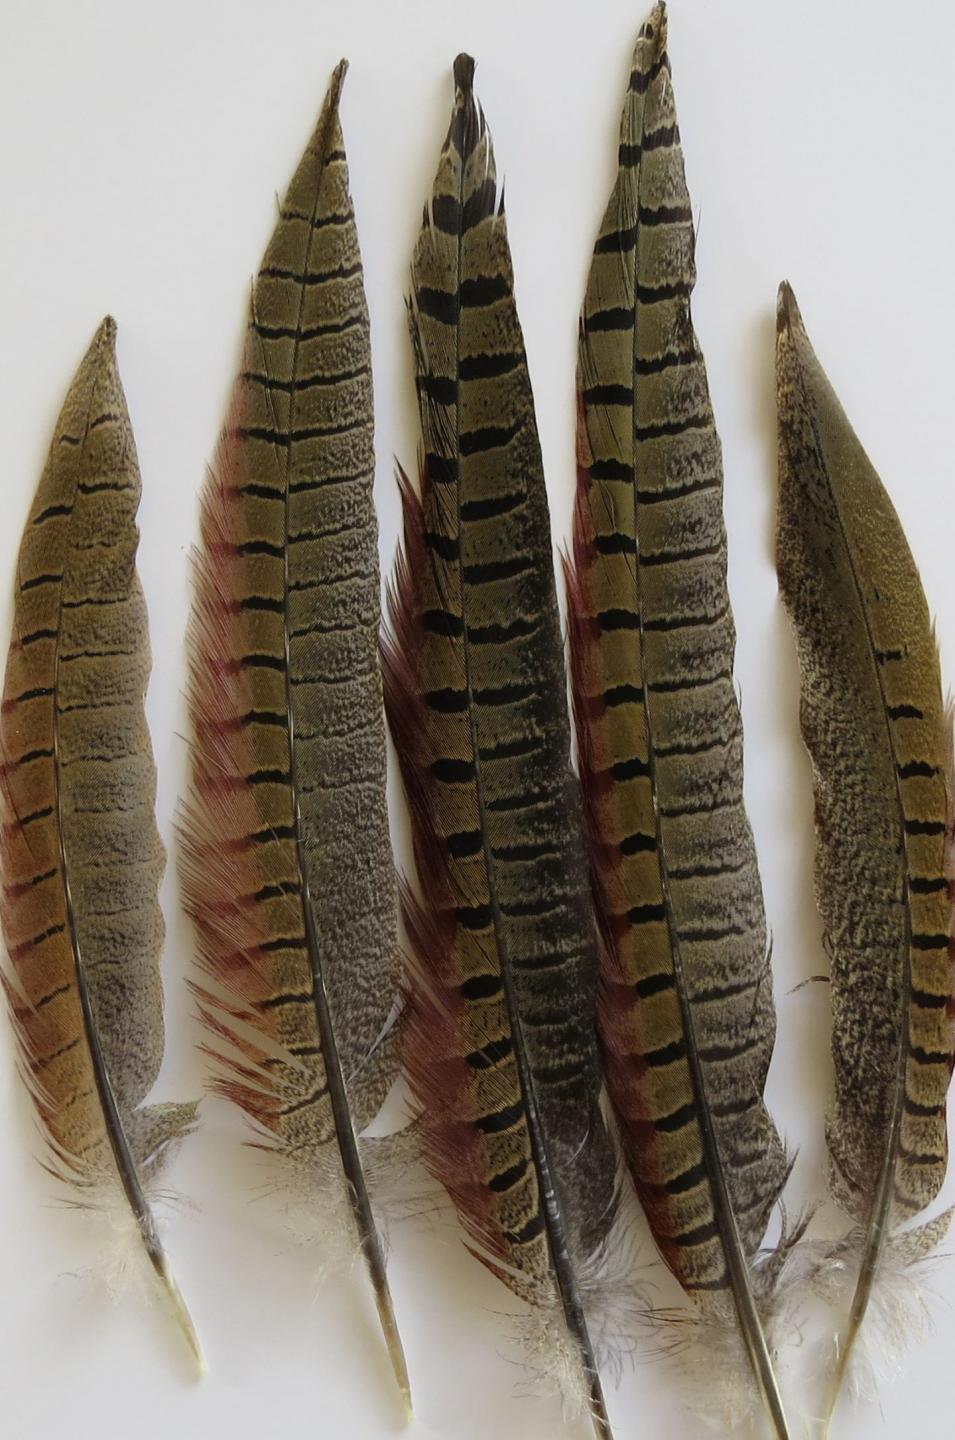 https://www.feathergirl.co.nz/sites/www.feathergirl.co.nz/files/styles/full_1440/public/product-images/pheasant-tail-feathers-medium-closeup.jpg